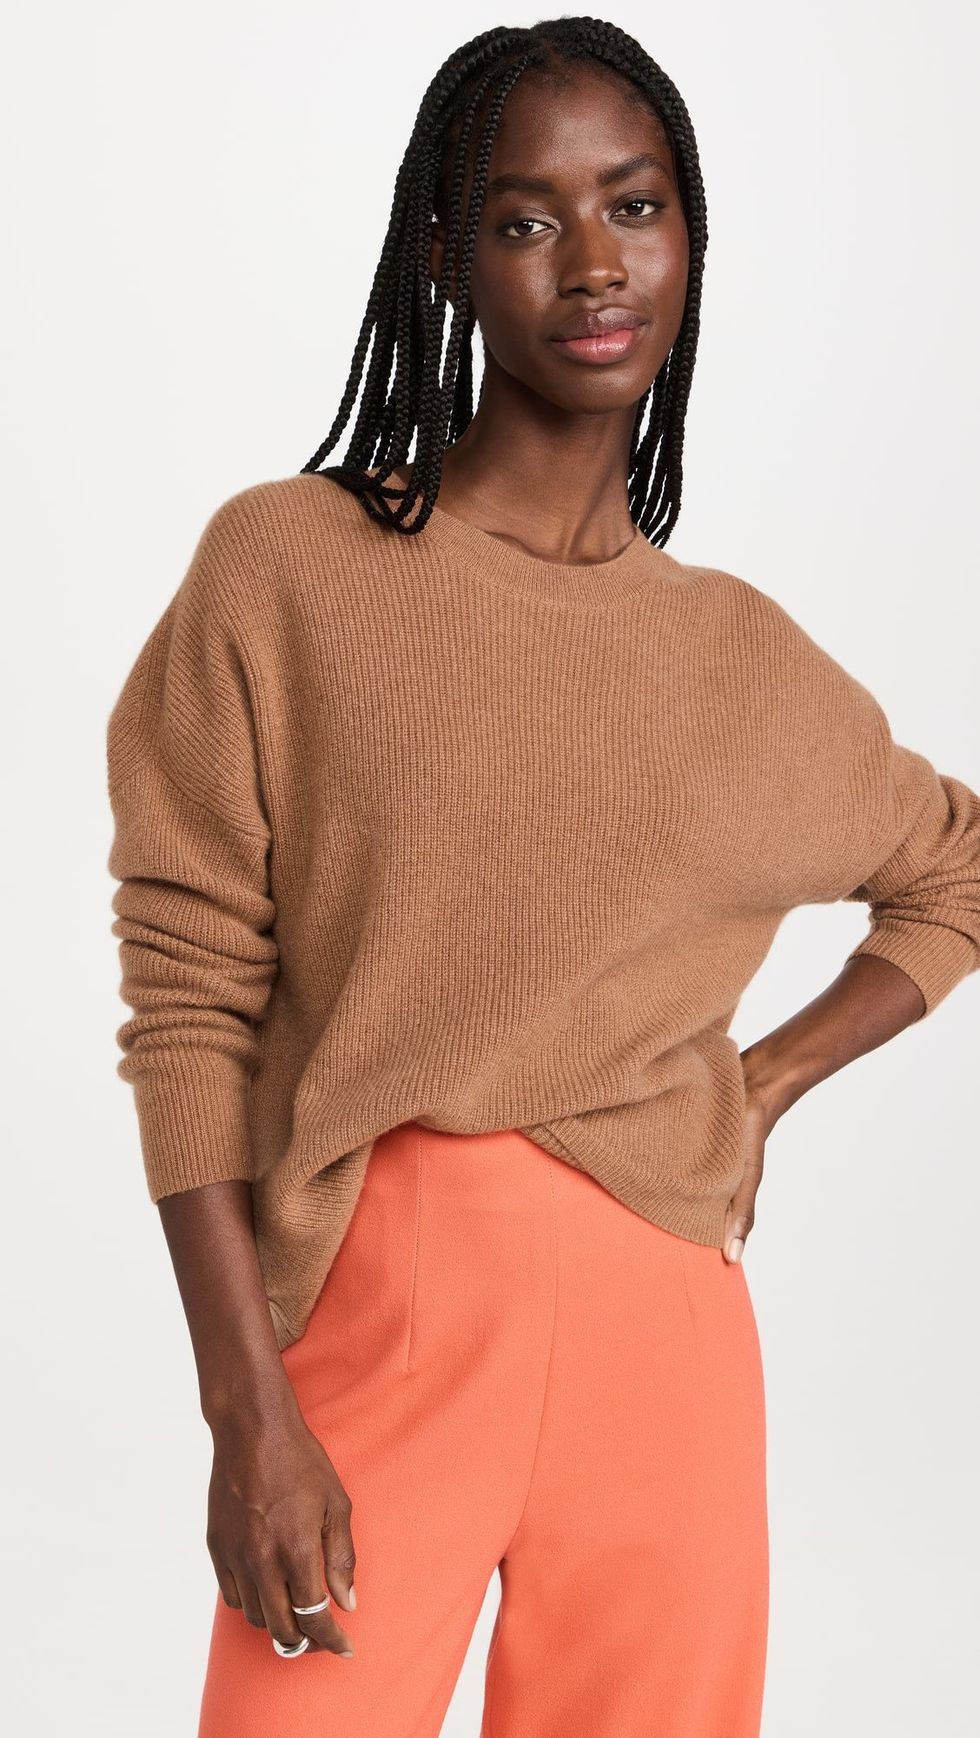 Shopbop's Post-Cyber Monday Sale 2022 Is Here: Best Deals to Shop